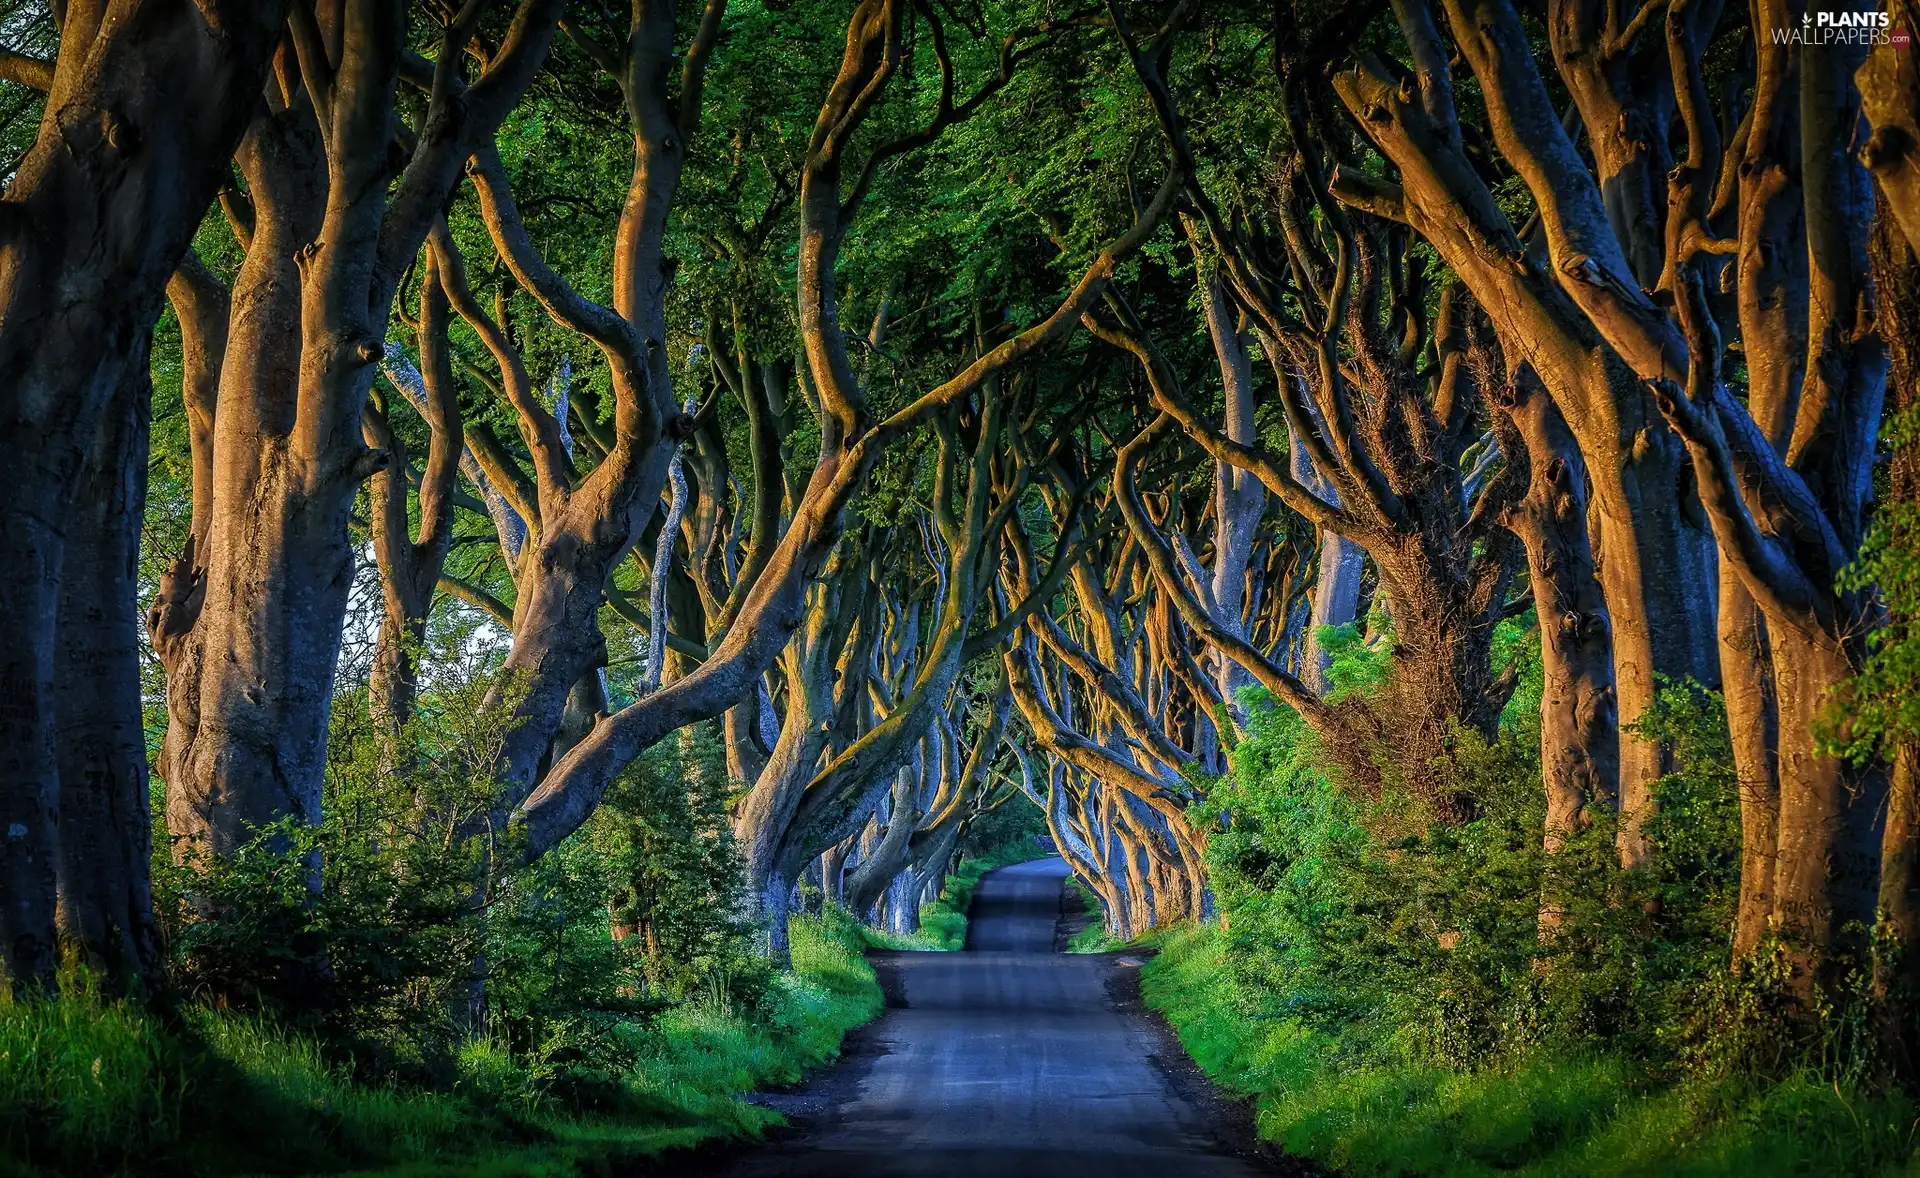 Way, County Antrim, viewes, Beech Alley Dark Hedges, Northern Ireland, trees, Beeches